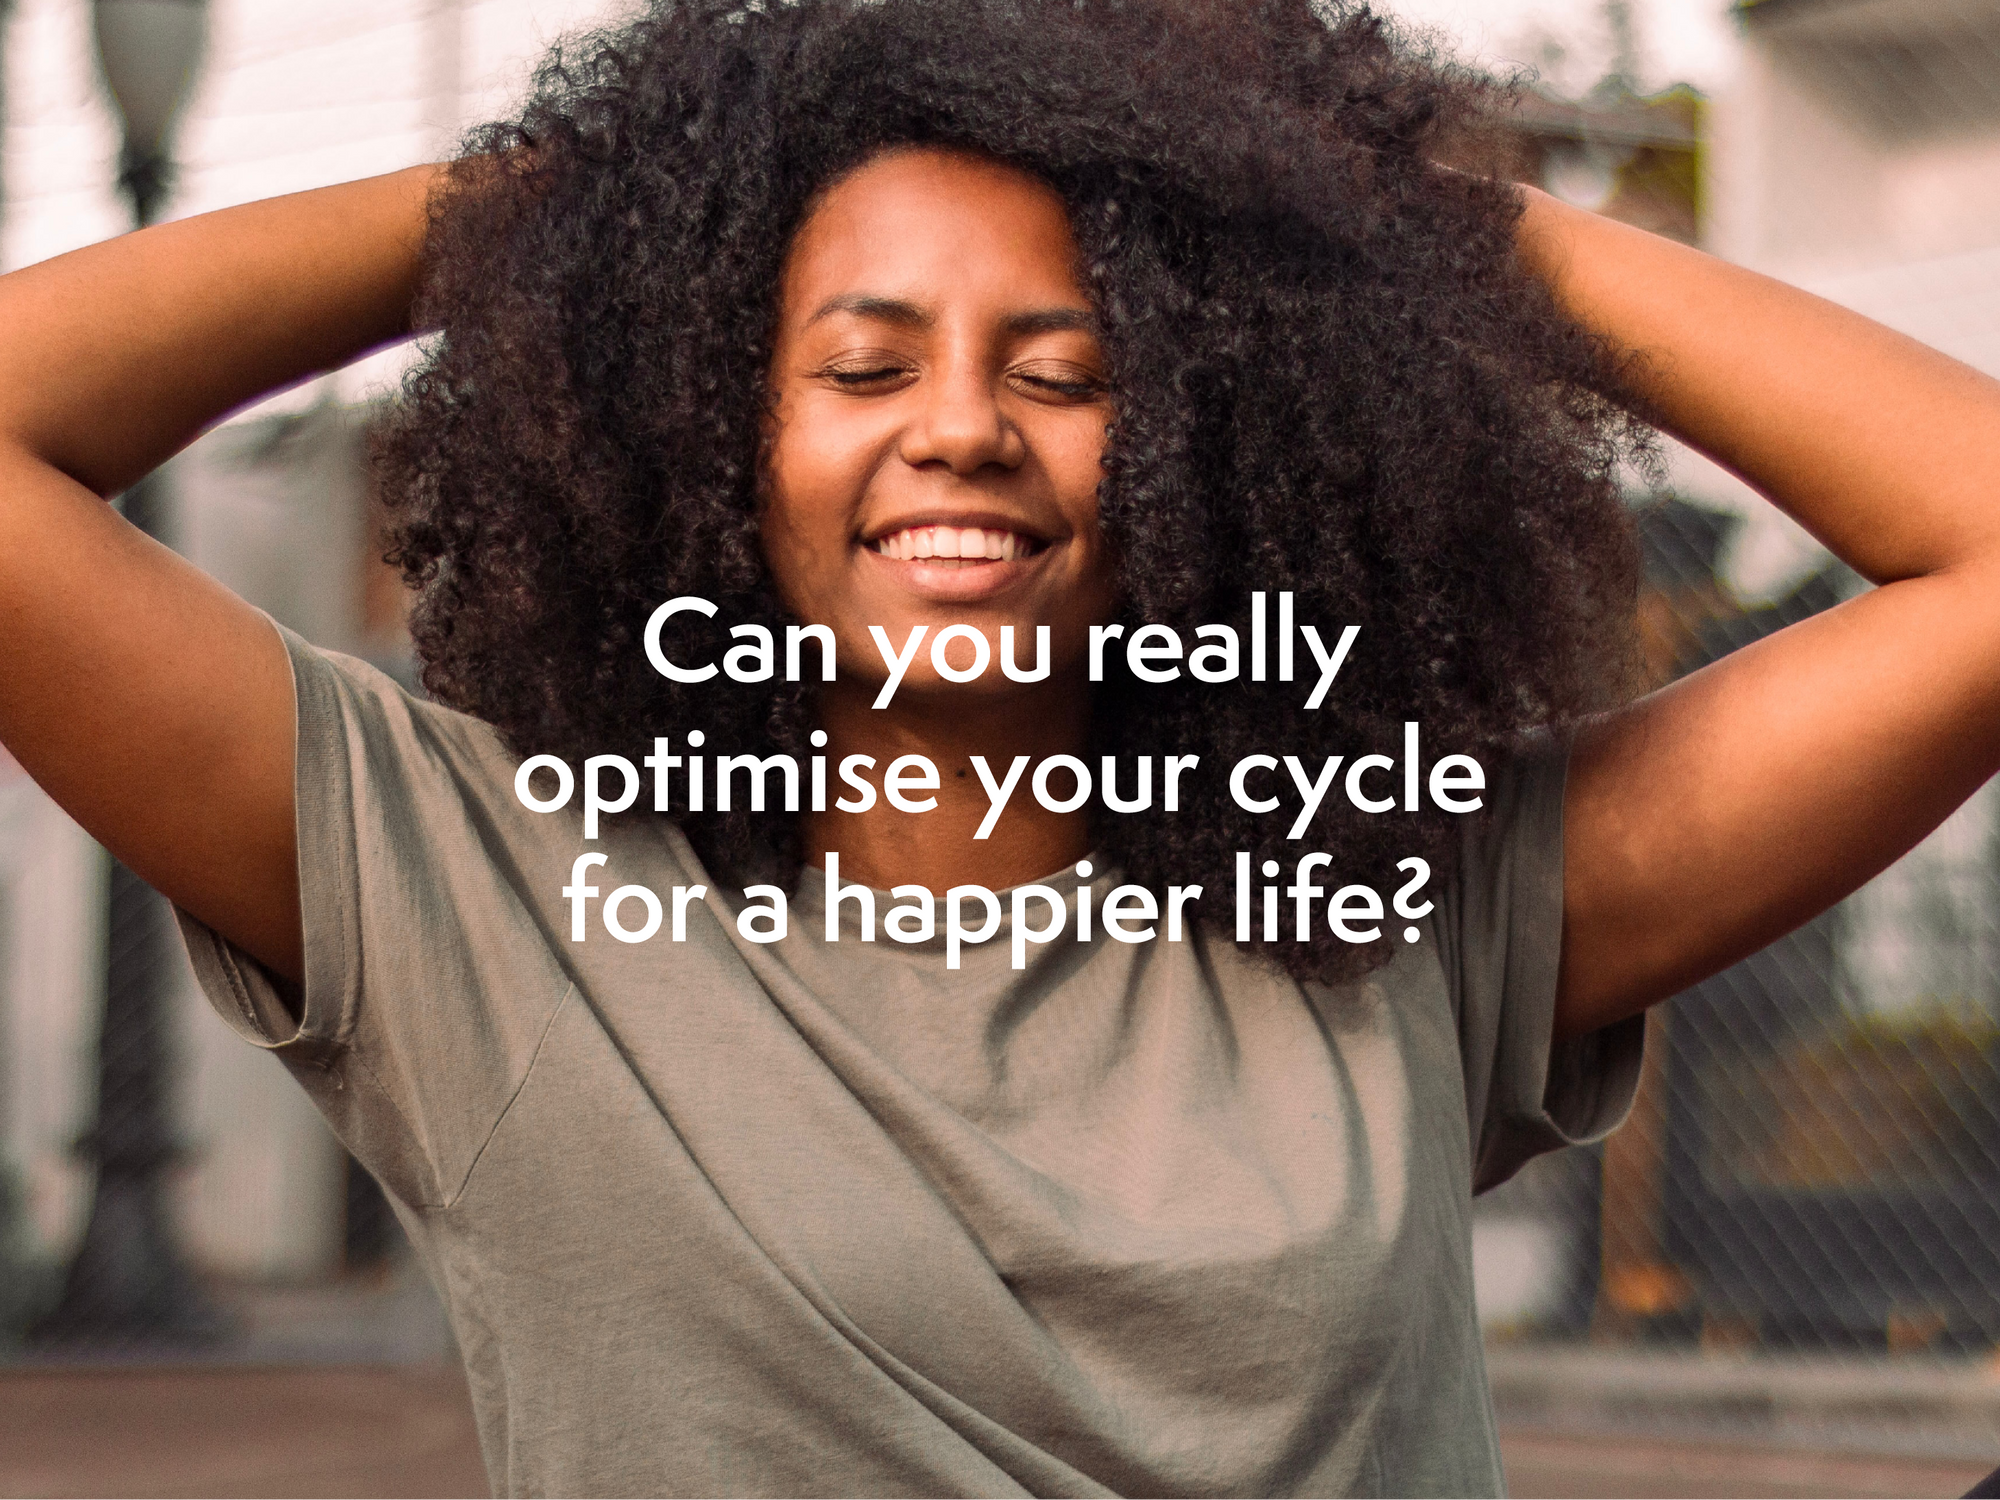 Can You Really Optimise Your Cycle For A Happier Life?